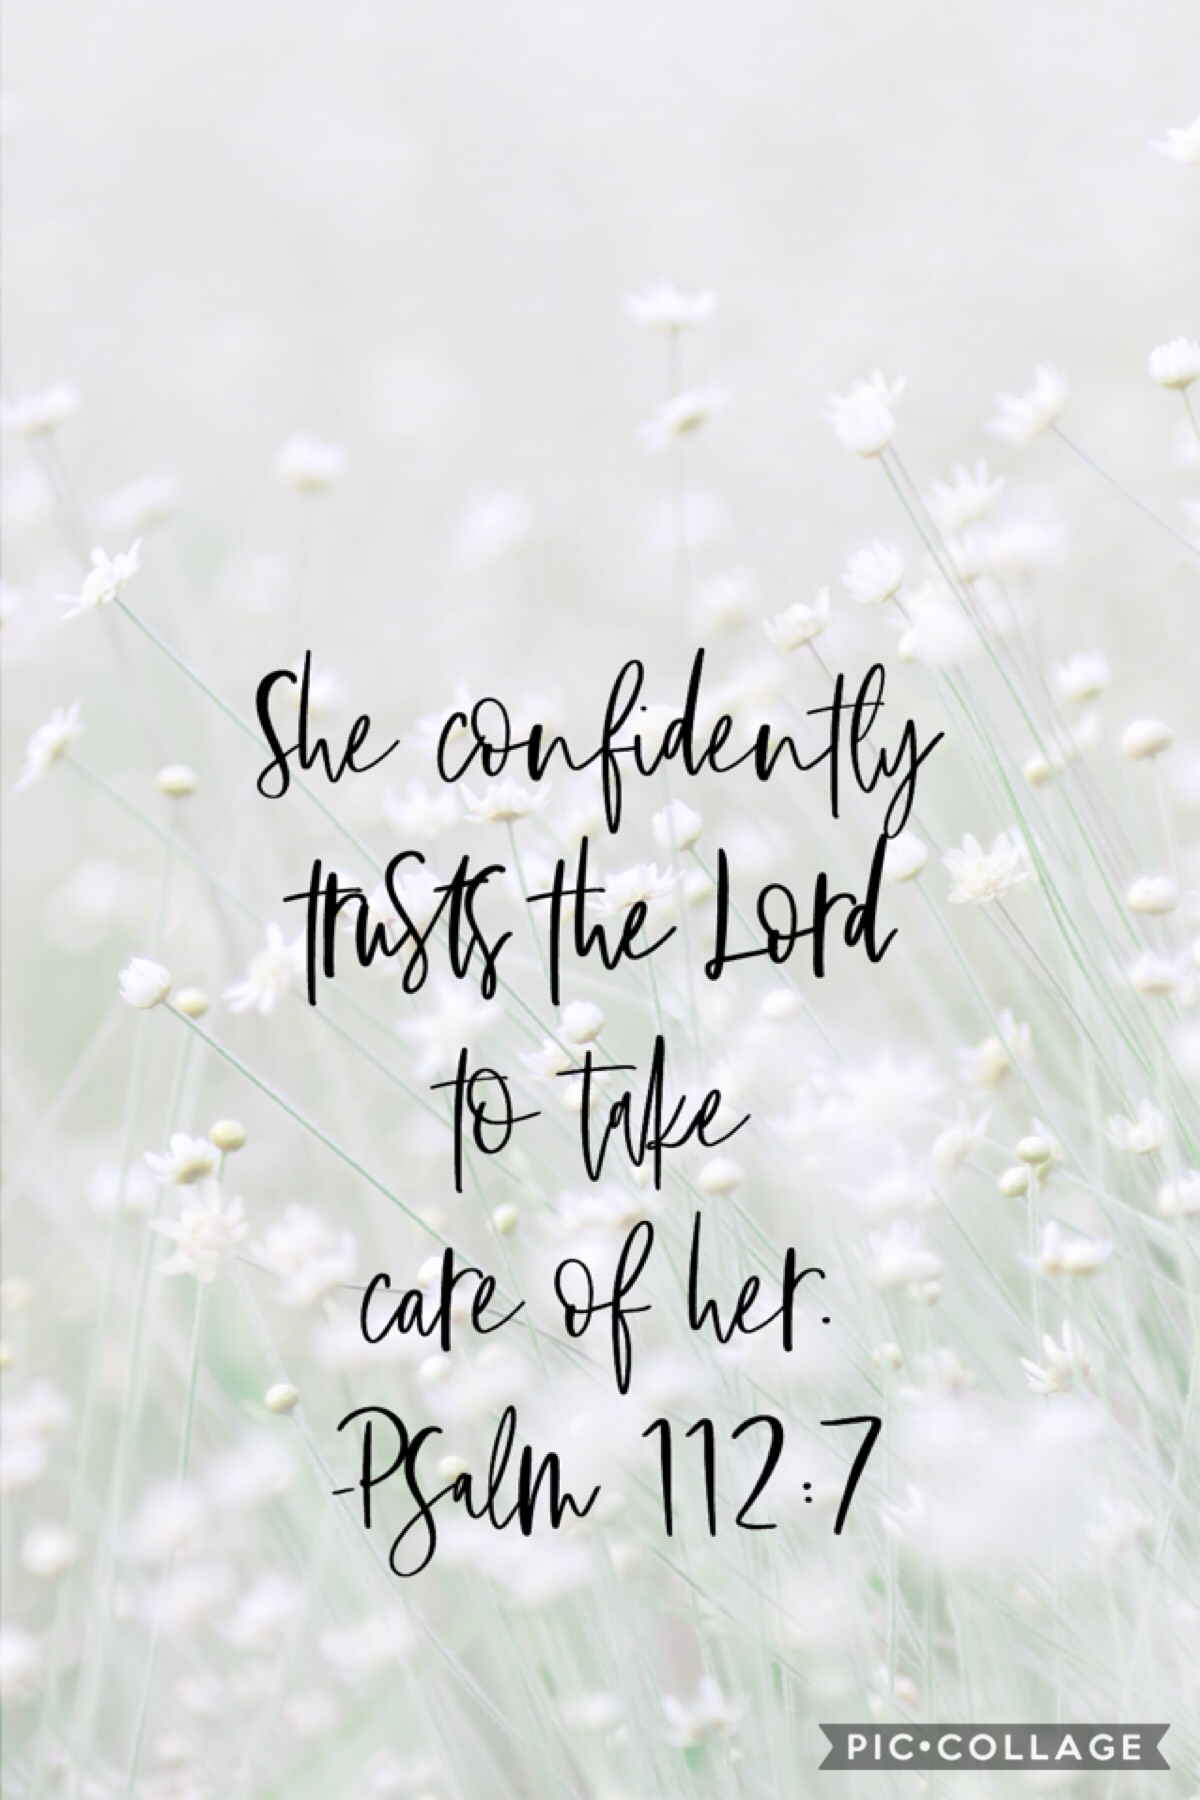 Hi y’all! It’s Big_Reader here!💕
Trust in the lord, girls! 🎈He will take care of you...all we have to do is give all of the stress and darkness weighing us down to him. He will carry our burden!👍🏼Love y’all!